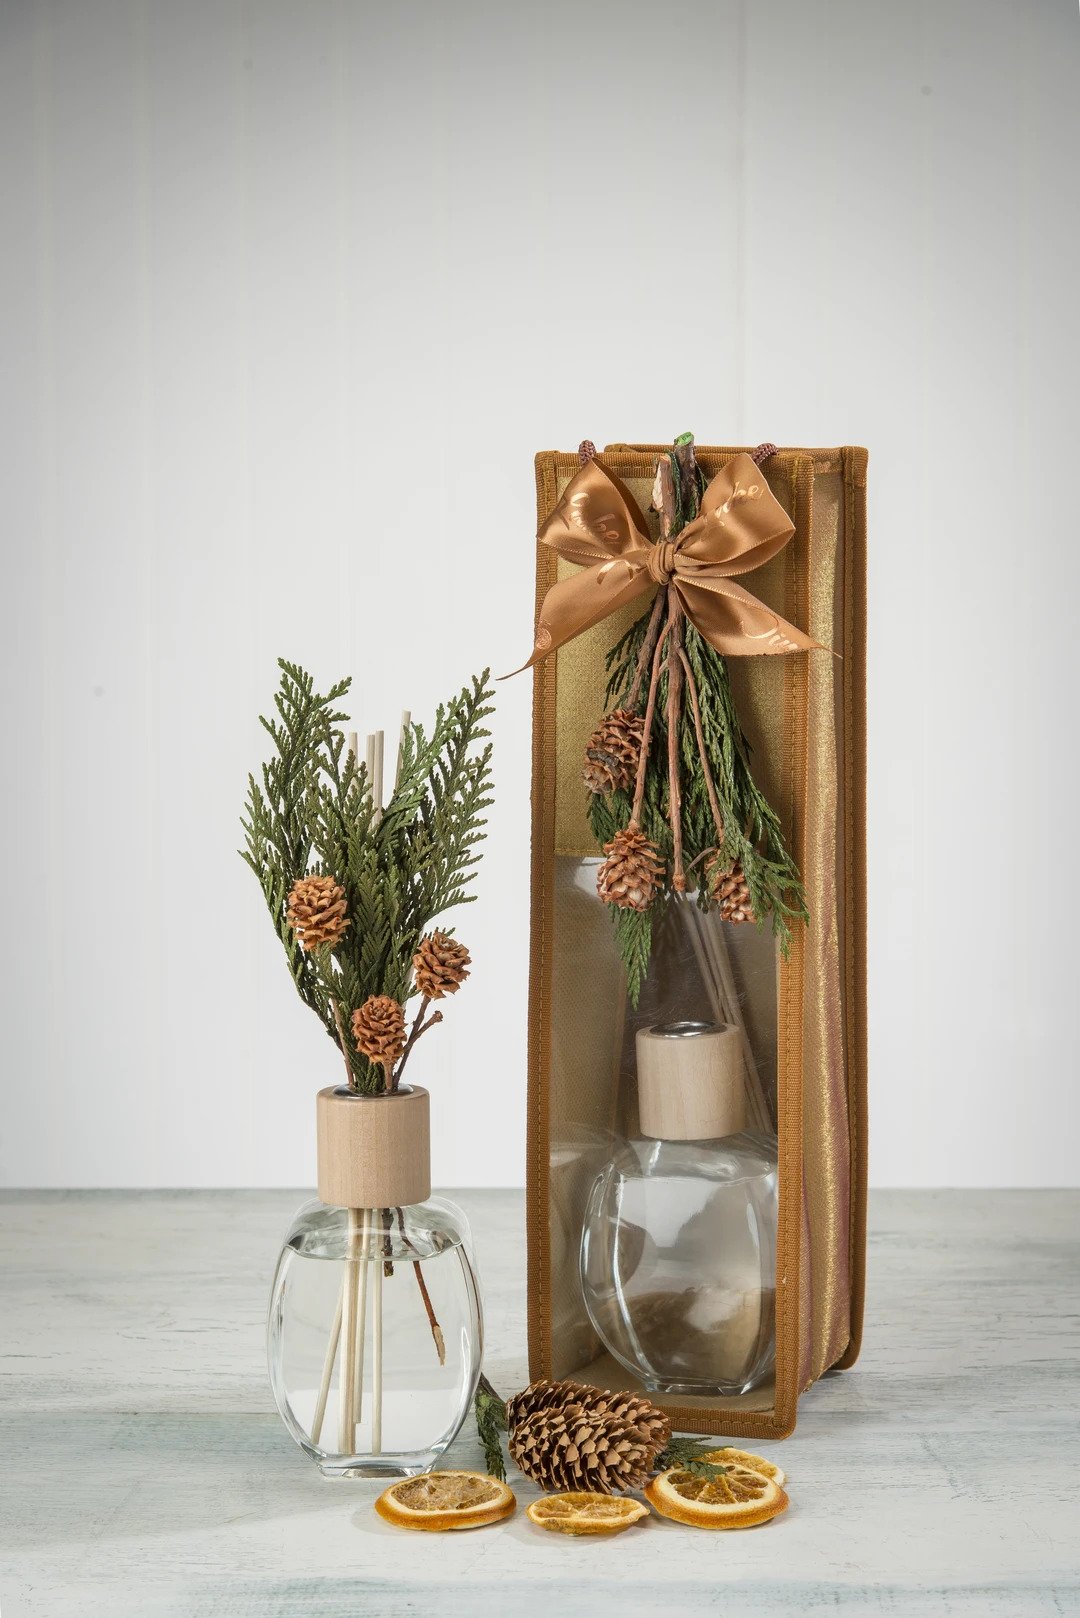 A holiday-themed still life featuring a glass vase with evergreen branches and pine cones, a Sonoma Timber Lake Diffuser from Sonoma Lavender, and dried orange slices on a wooden surface.